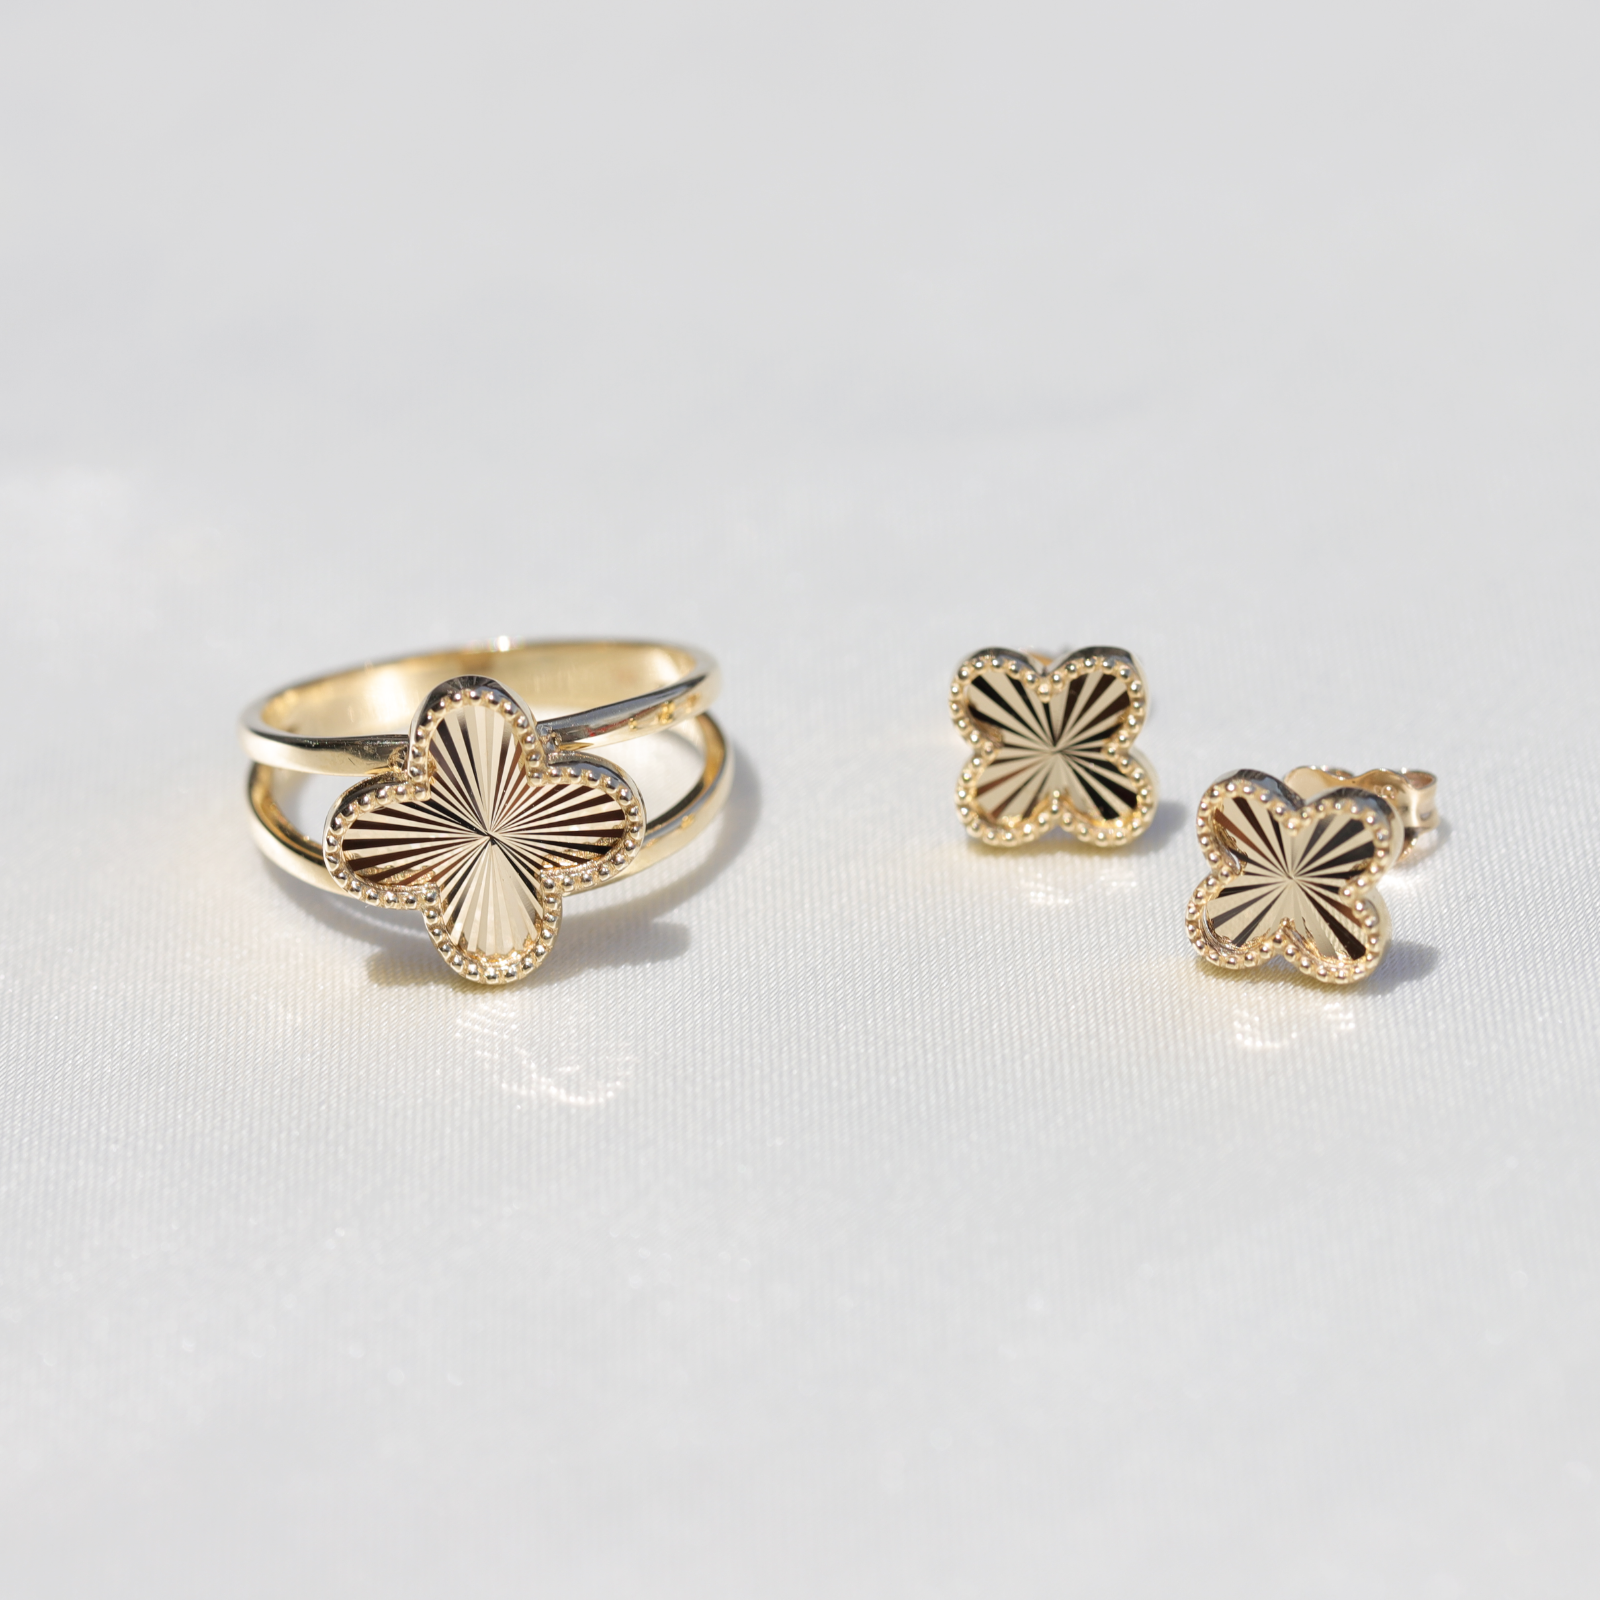 9ct Yellow Gold Four Leaf Clover Ring With Beaded Edges